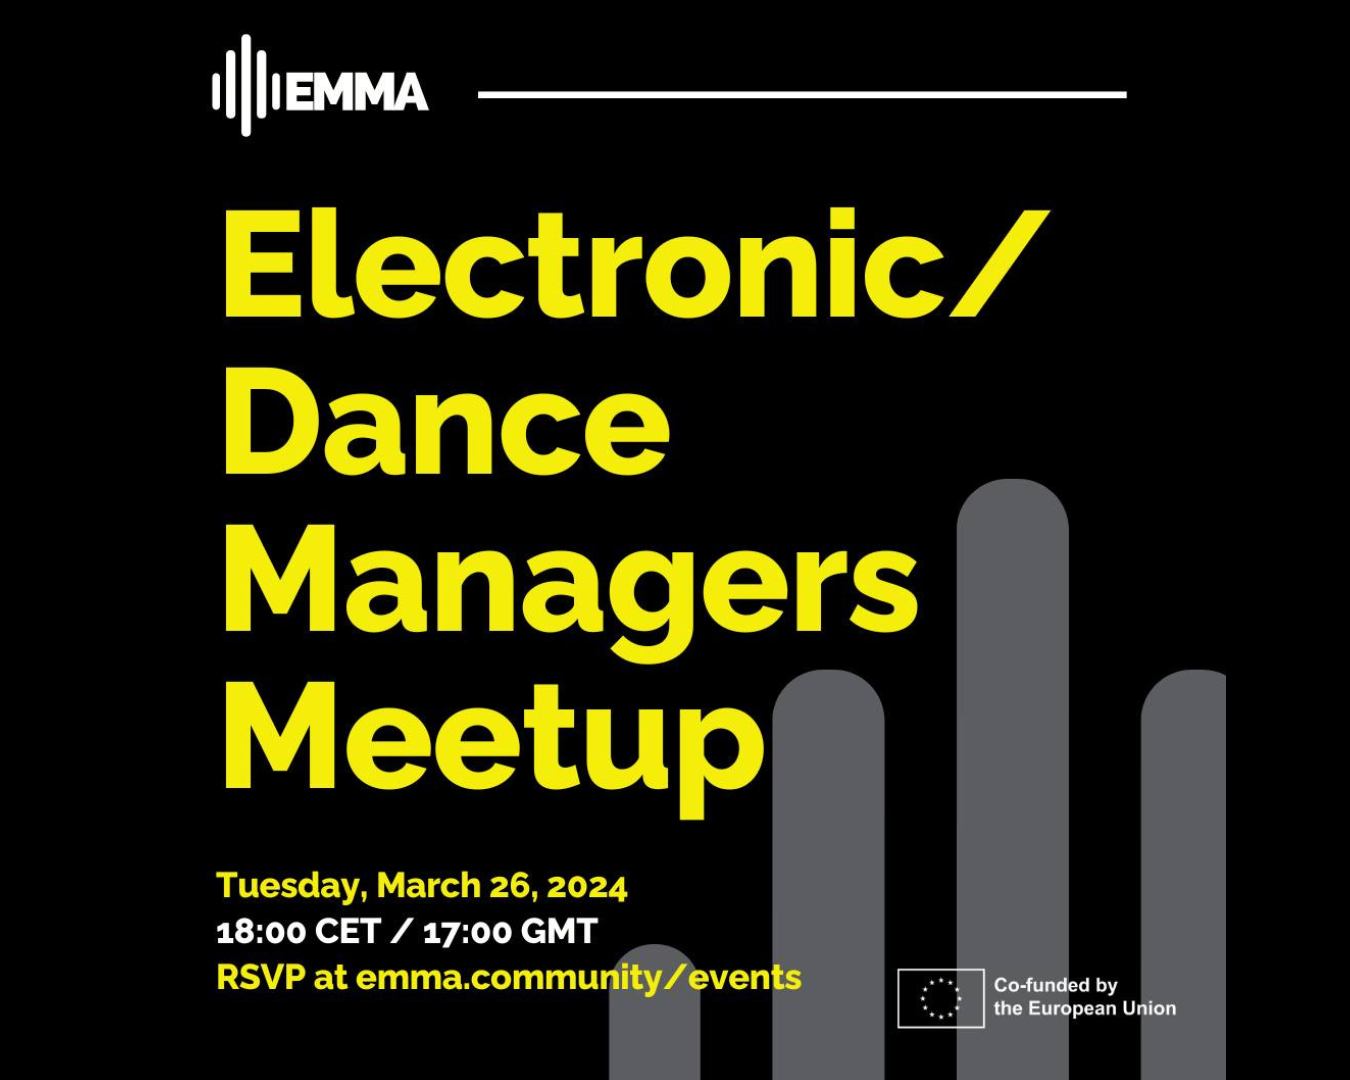 EMMA Electronic/Dance Managers Meetup